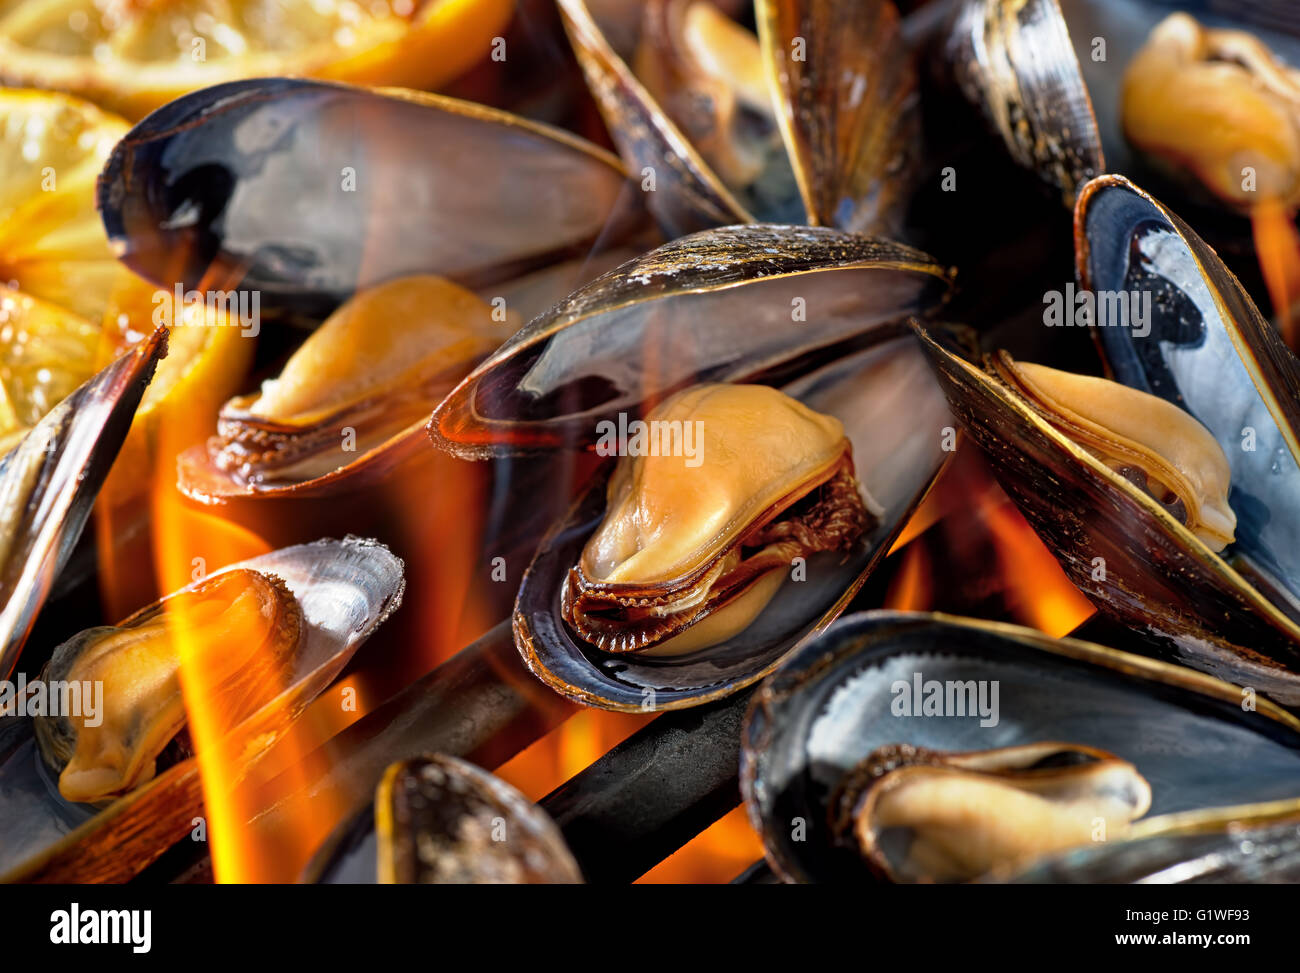 Blue mussels on flaming grill with lemon. Stock Photo